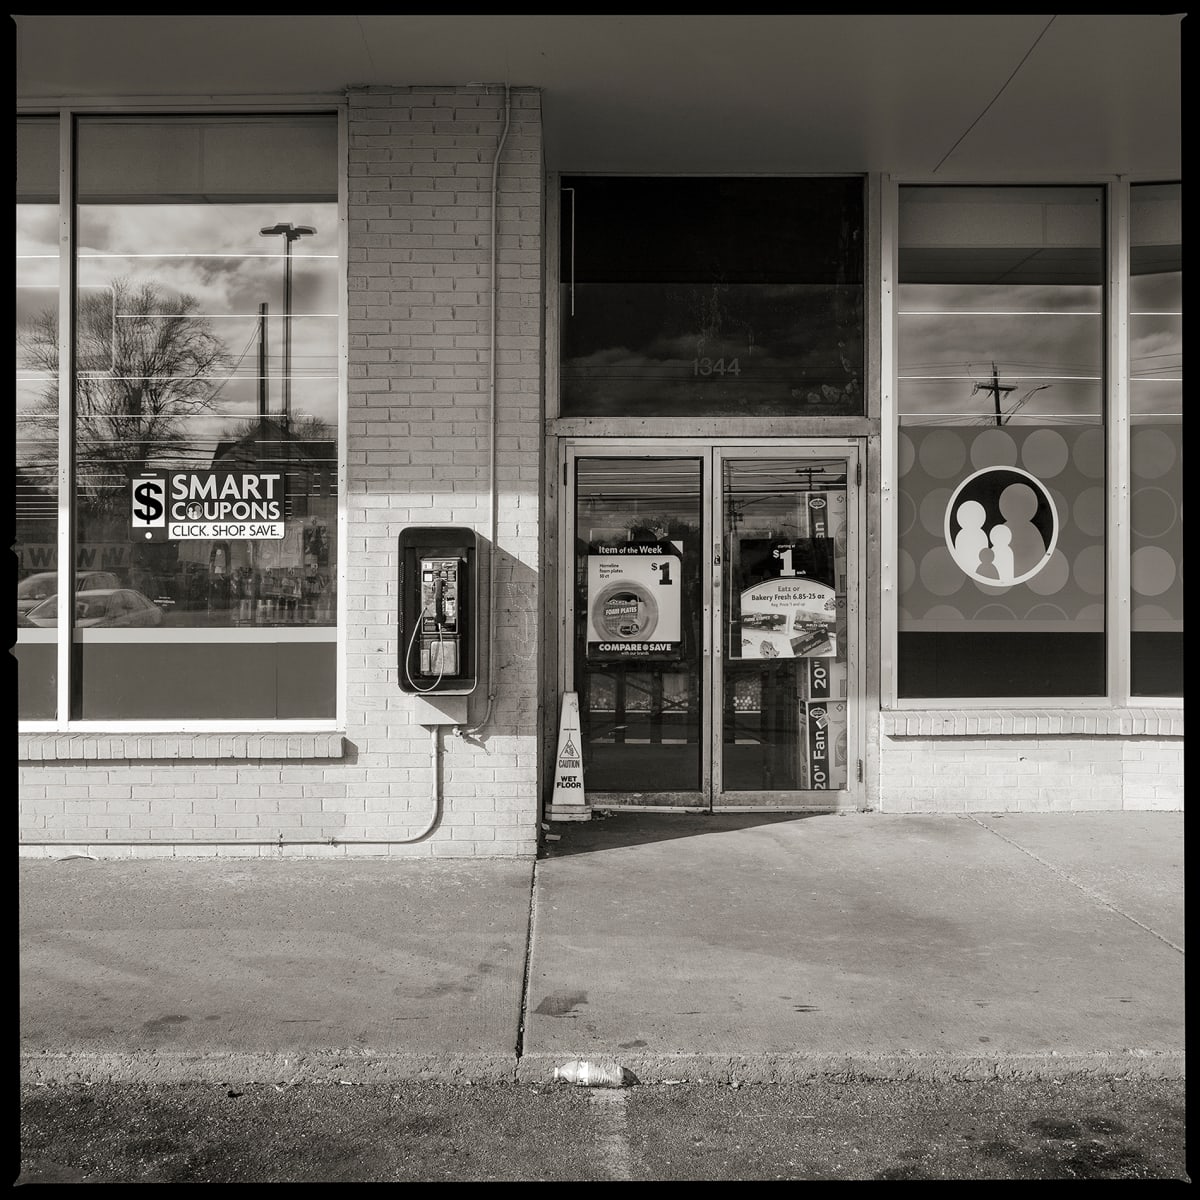 585.254.9782 – Family Dollar Store #1962, 1340 Lyell Avenue, Rochester, NY 14606 by Eric T. Kunsman  Image: ID: A black and white image shows a payphone mounted to a storefront.  The left side of the payphone is a window with a Smart Savers advertisement.  The right side of the payphone is the glass door entry way to the building that is covered in advertisements and has a "Caution Wet Floor" sign outside of the door.